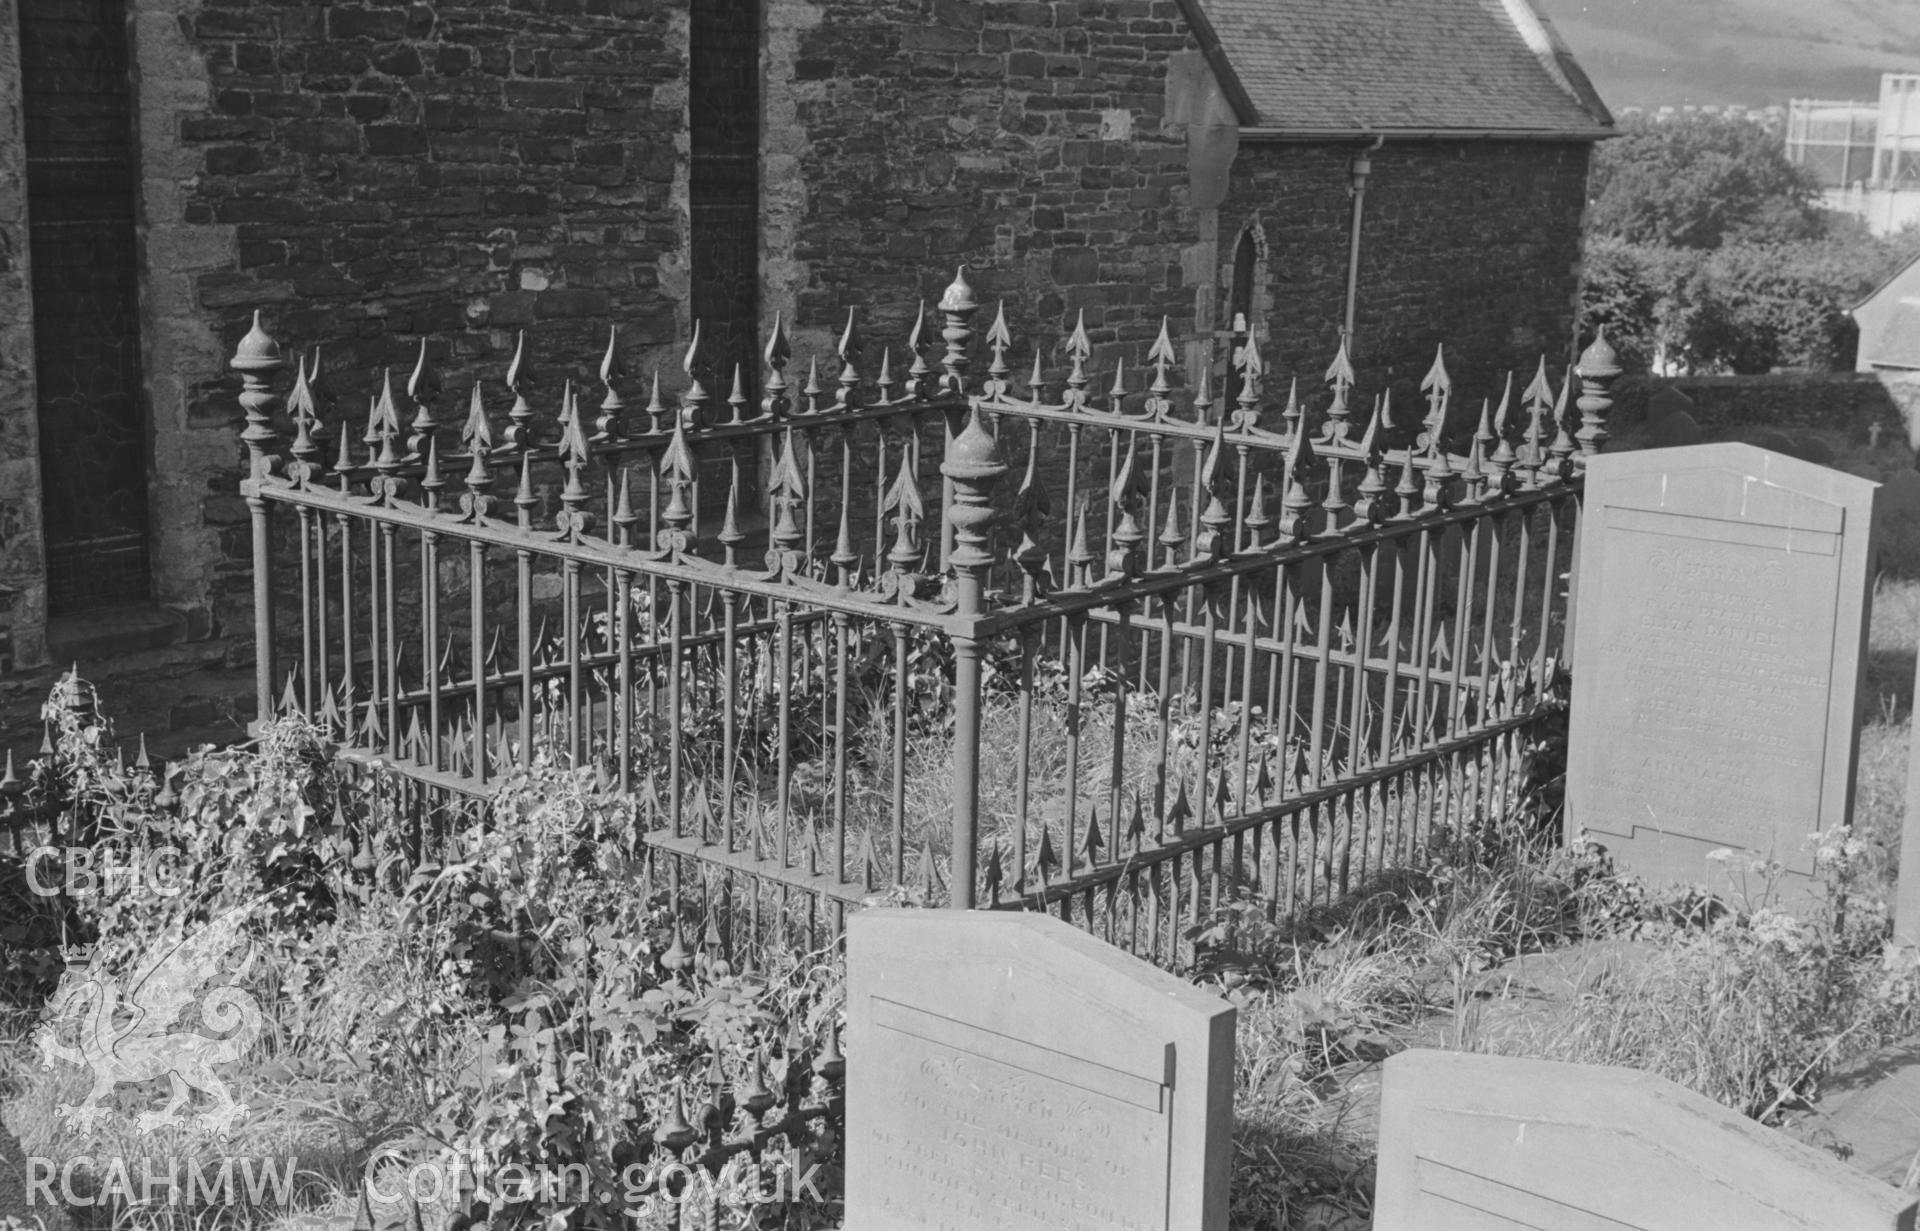 Digital copy of black & white negative showing cast iron enclosure in graveyard just north east of north transept of St. Padarn's church, Llanbadarn. Photographed by Arthur O. Chater on 19th August 1967, looking south west from Grid Reference SN 599 810.